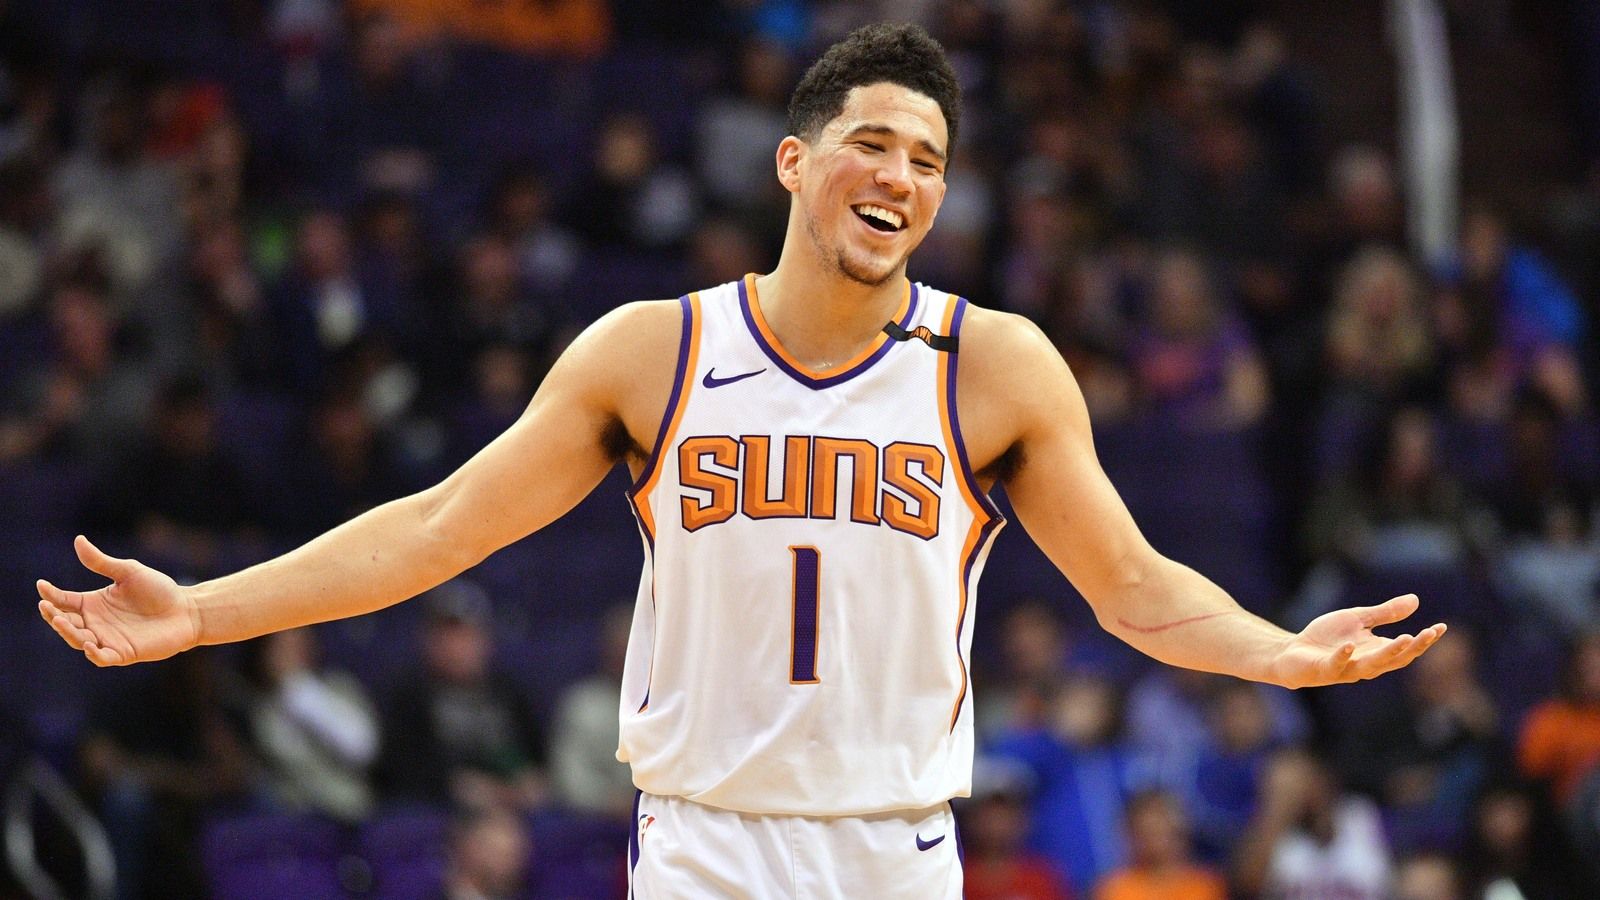 Ray Allen Names Devin Booker and Bradley Beal as Young Shooters to Look Out For in NBA